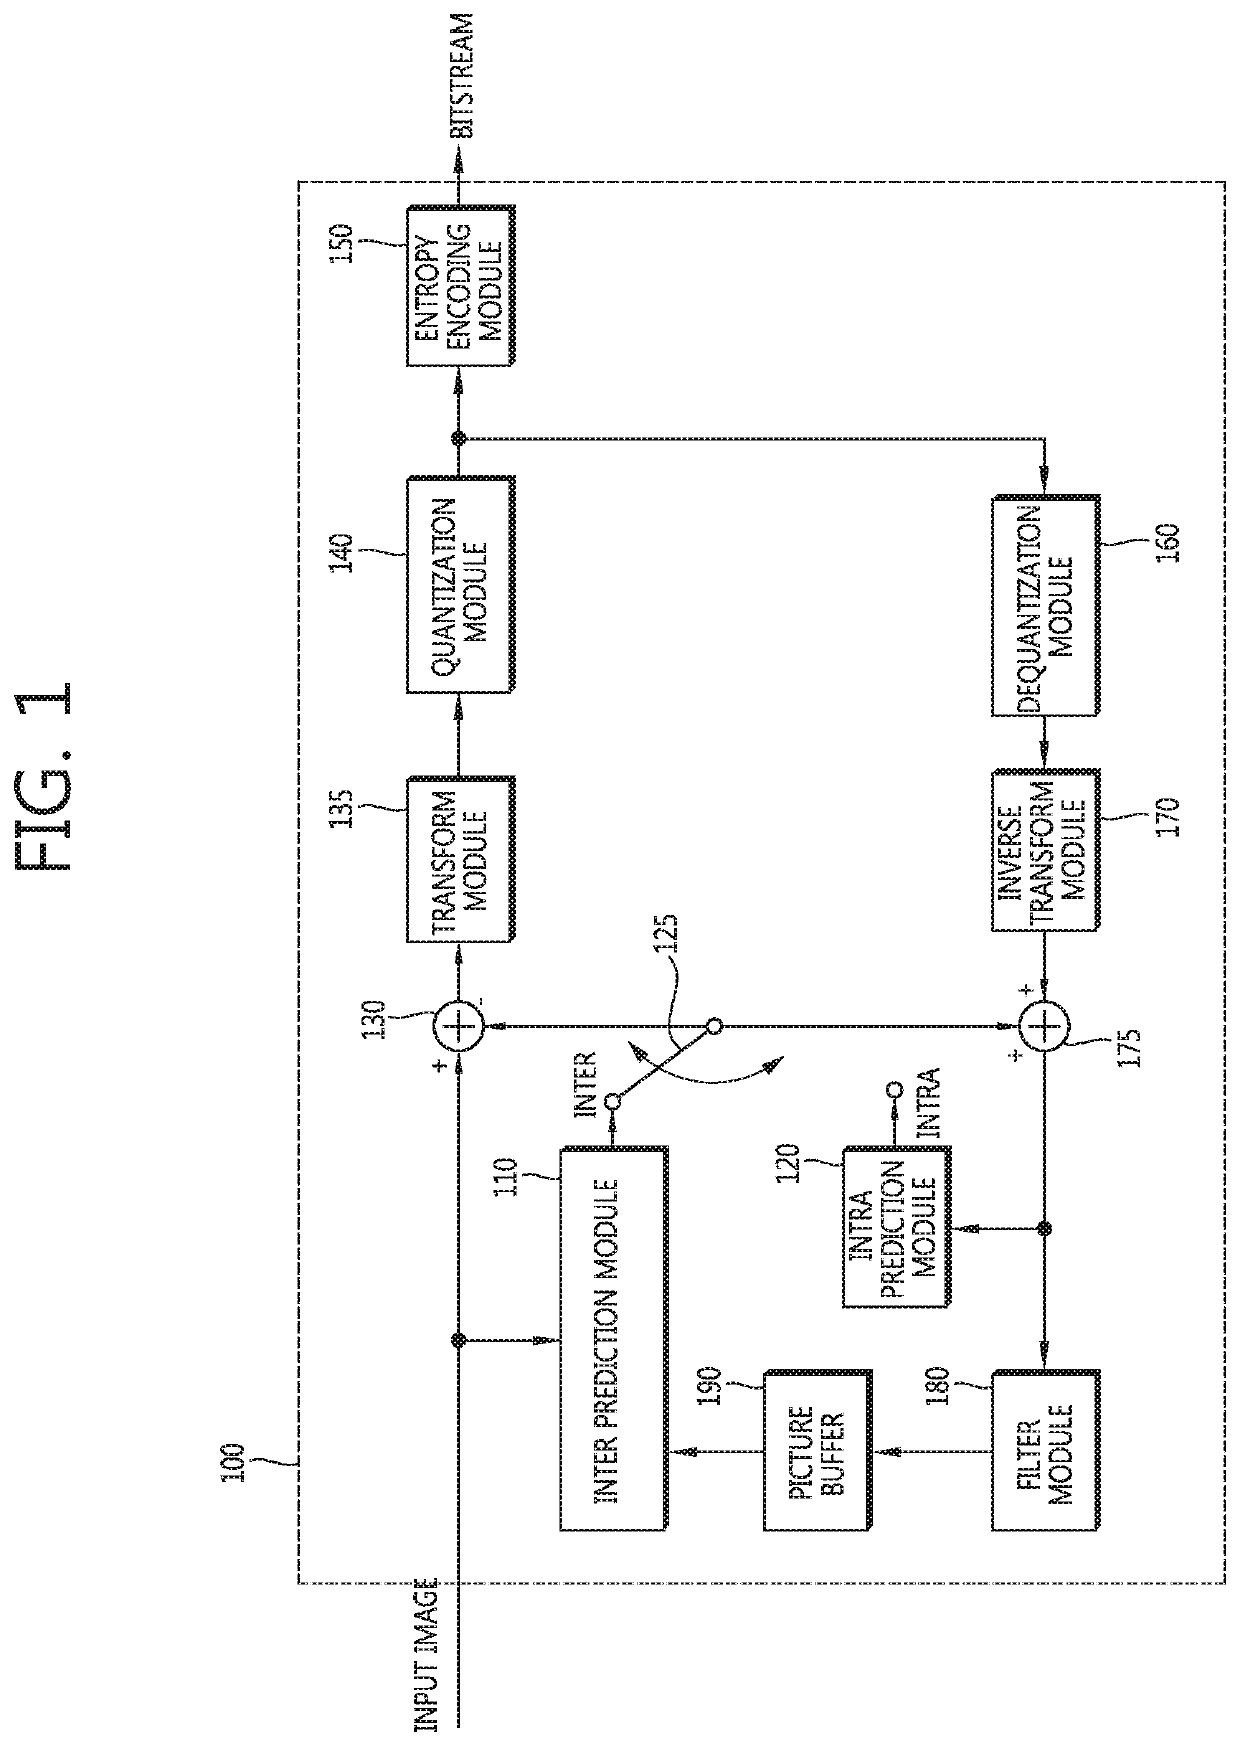 Method and apparatus for image encoding/decoding